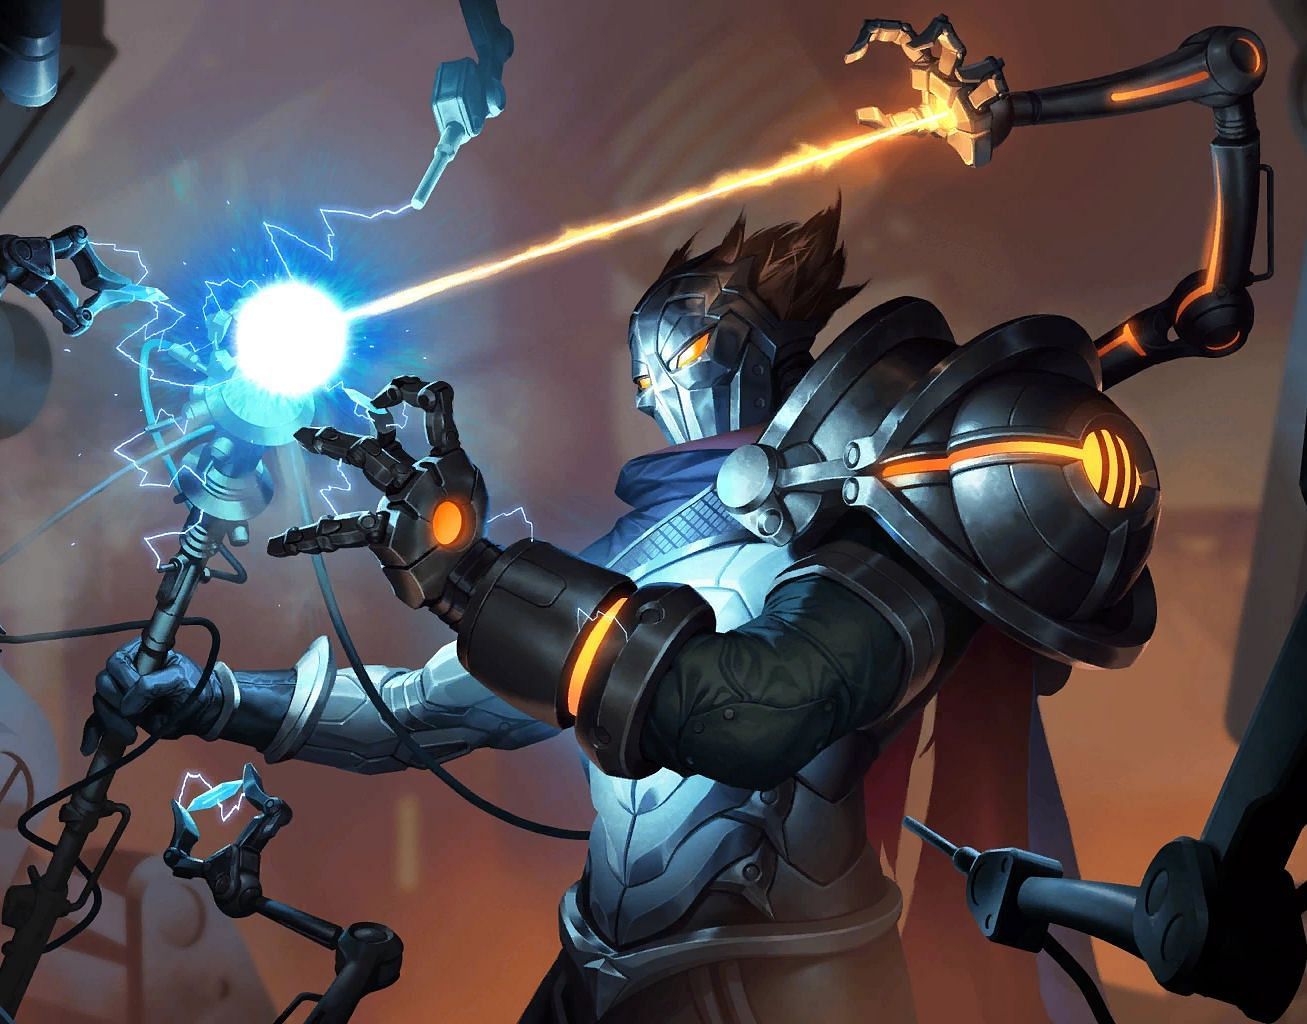 Splash art for Champion Viktor as seen in the League of Legends video game. (Image via Riot Games)